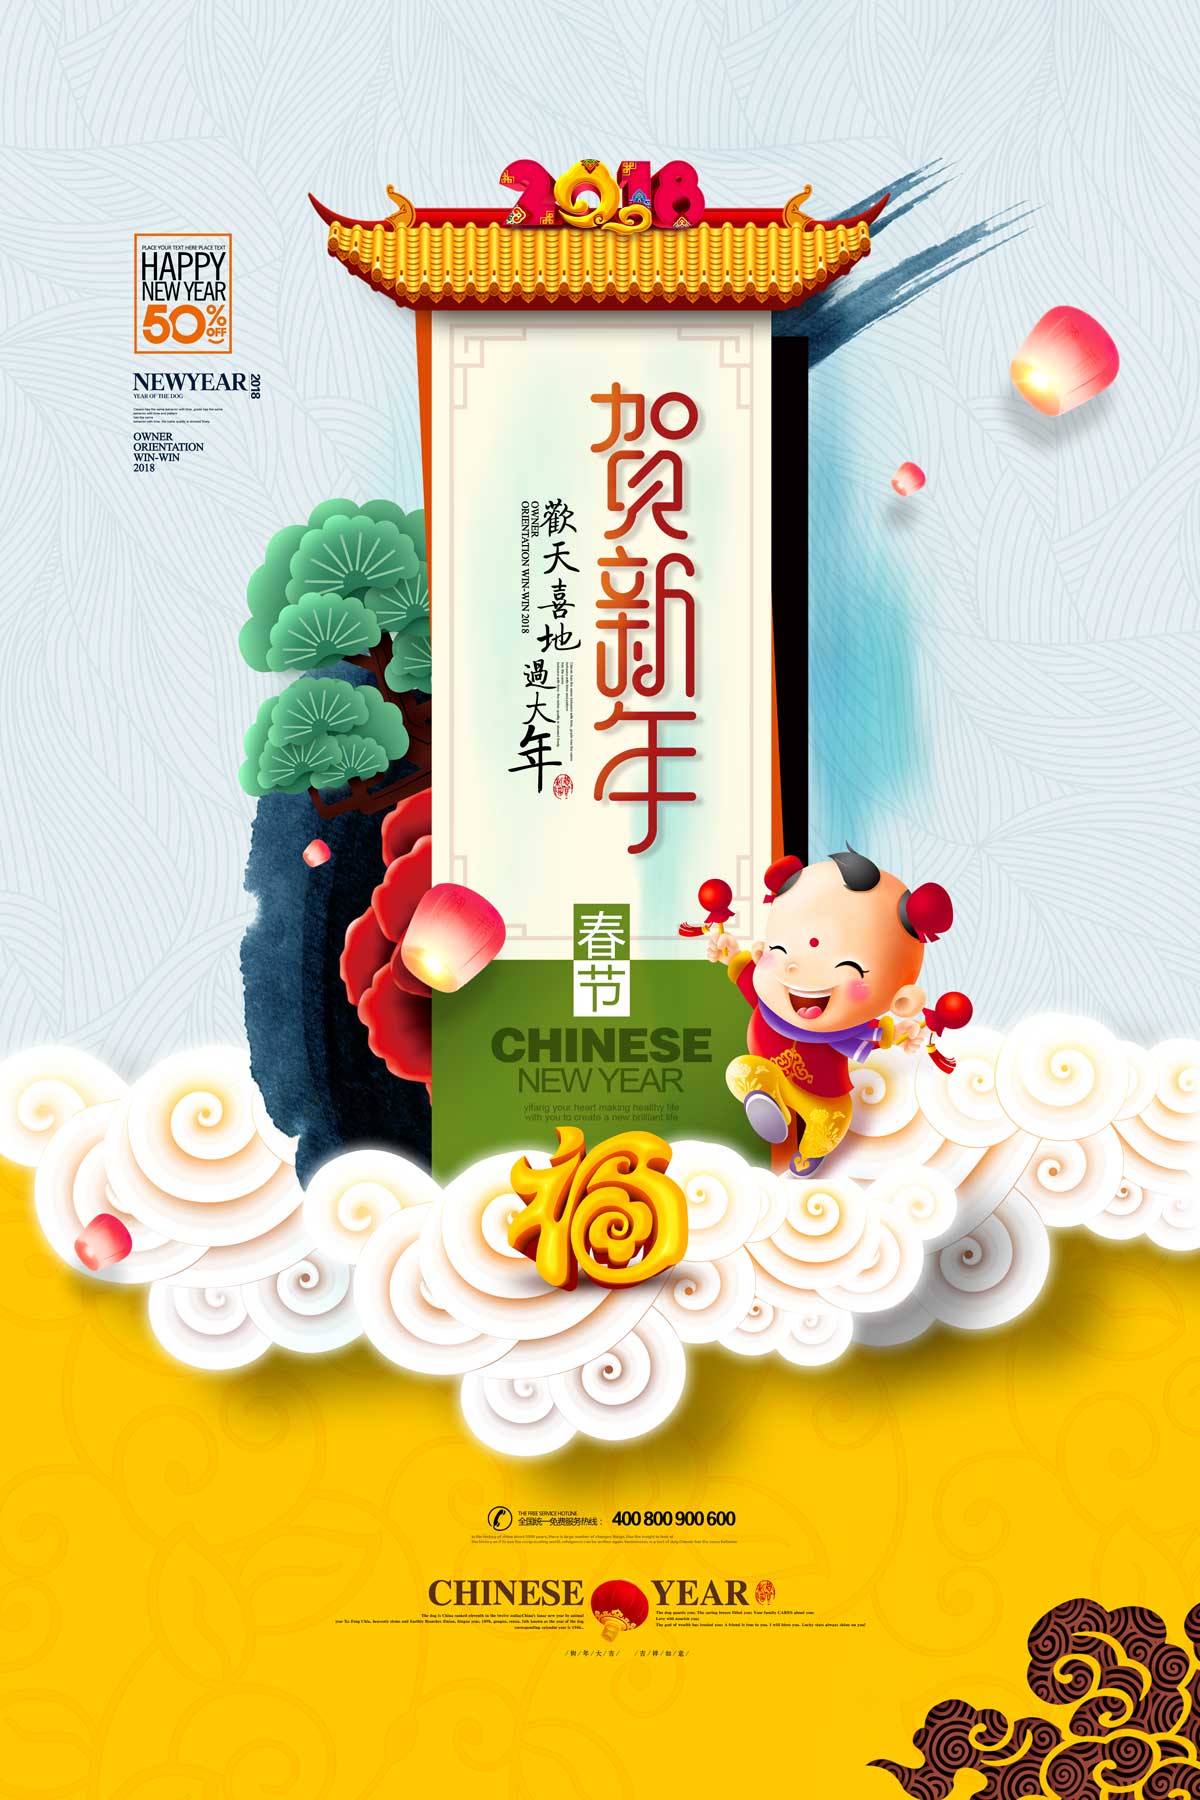 Chinese traditional New Year Festival promotional poster design -  PSD File Free Download